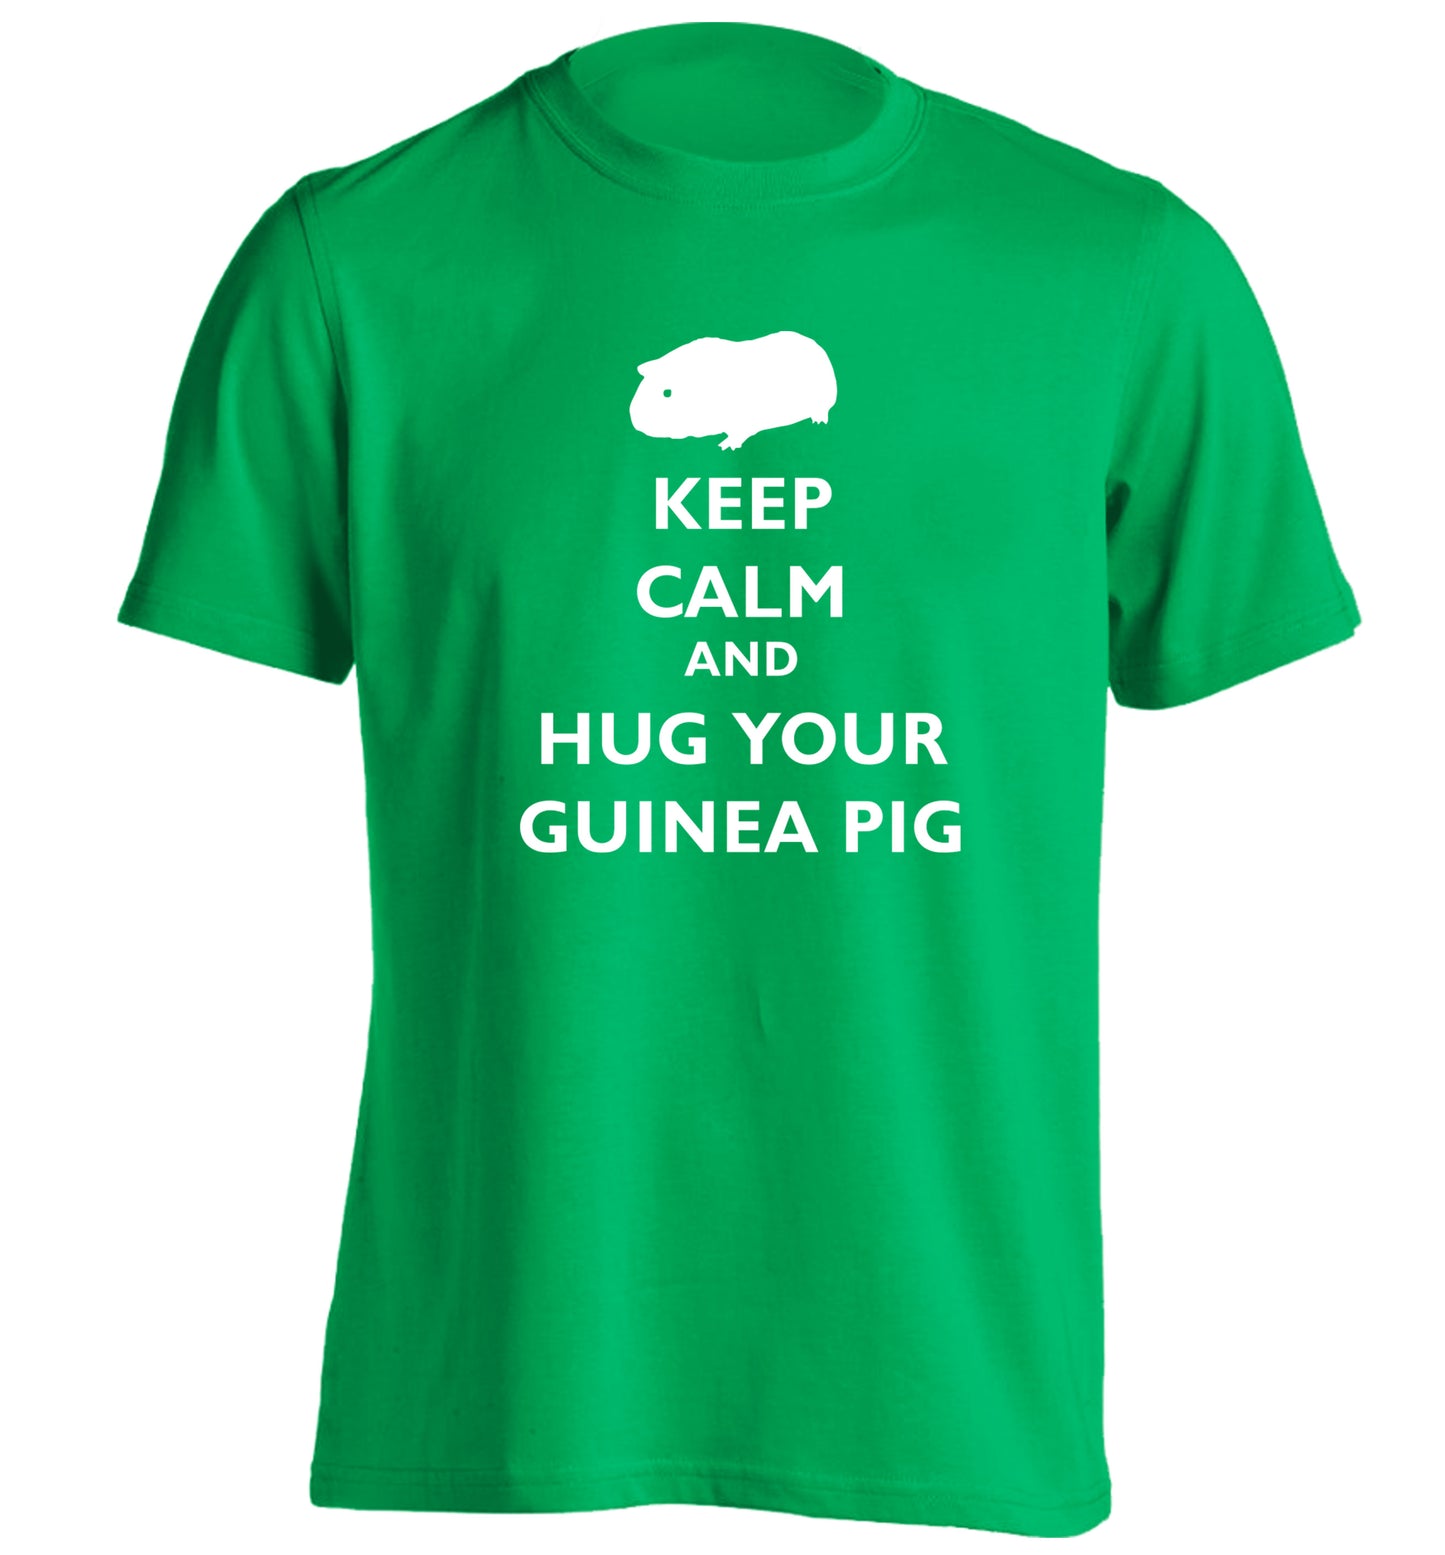 Keep calm and hug your guineapig adults unisex green Tshirt 2XL